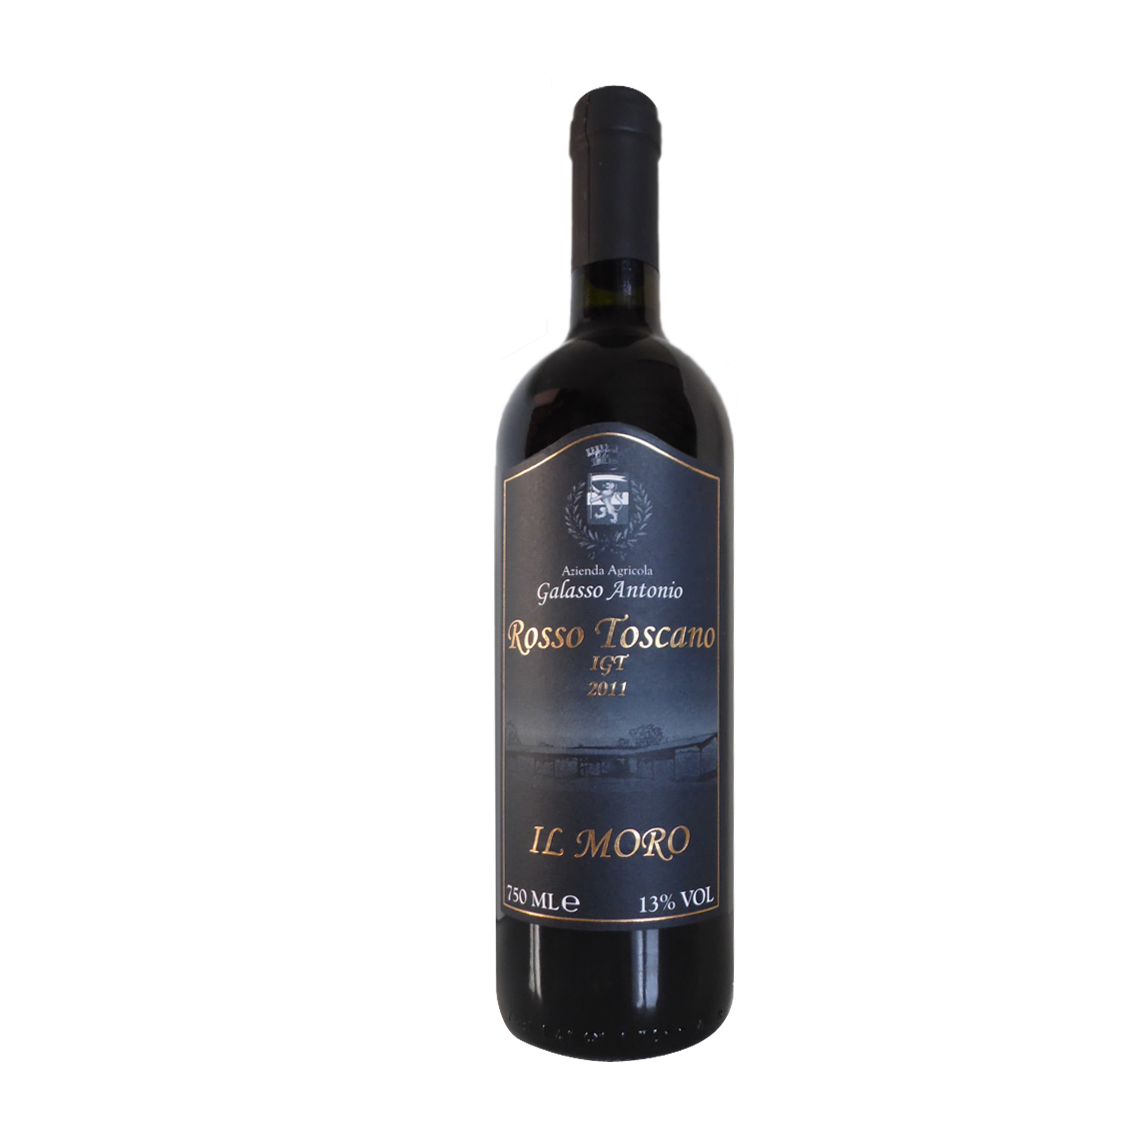 Il Moro (Igt Toscana Rosso) 2011